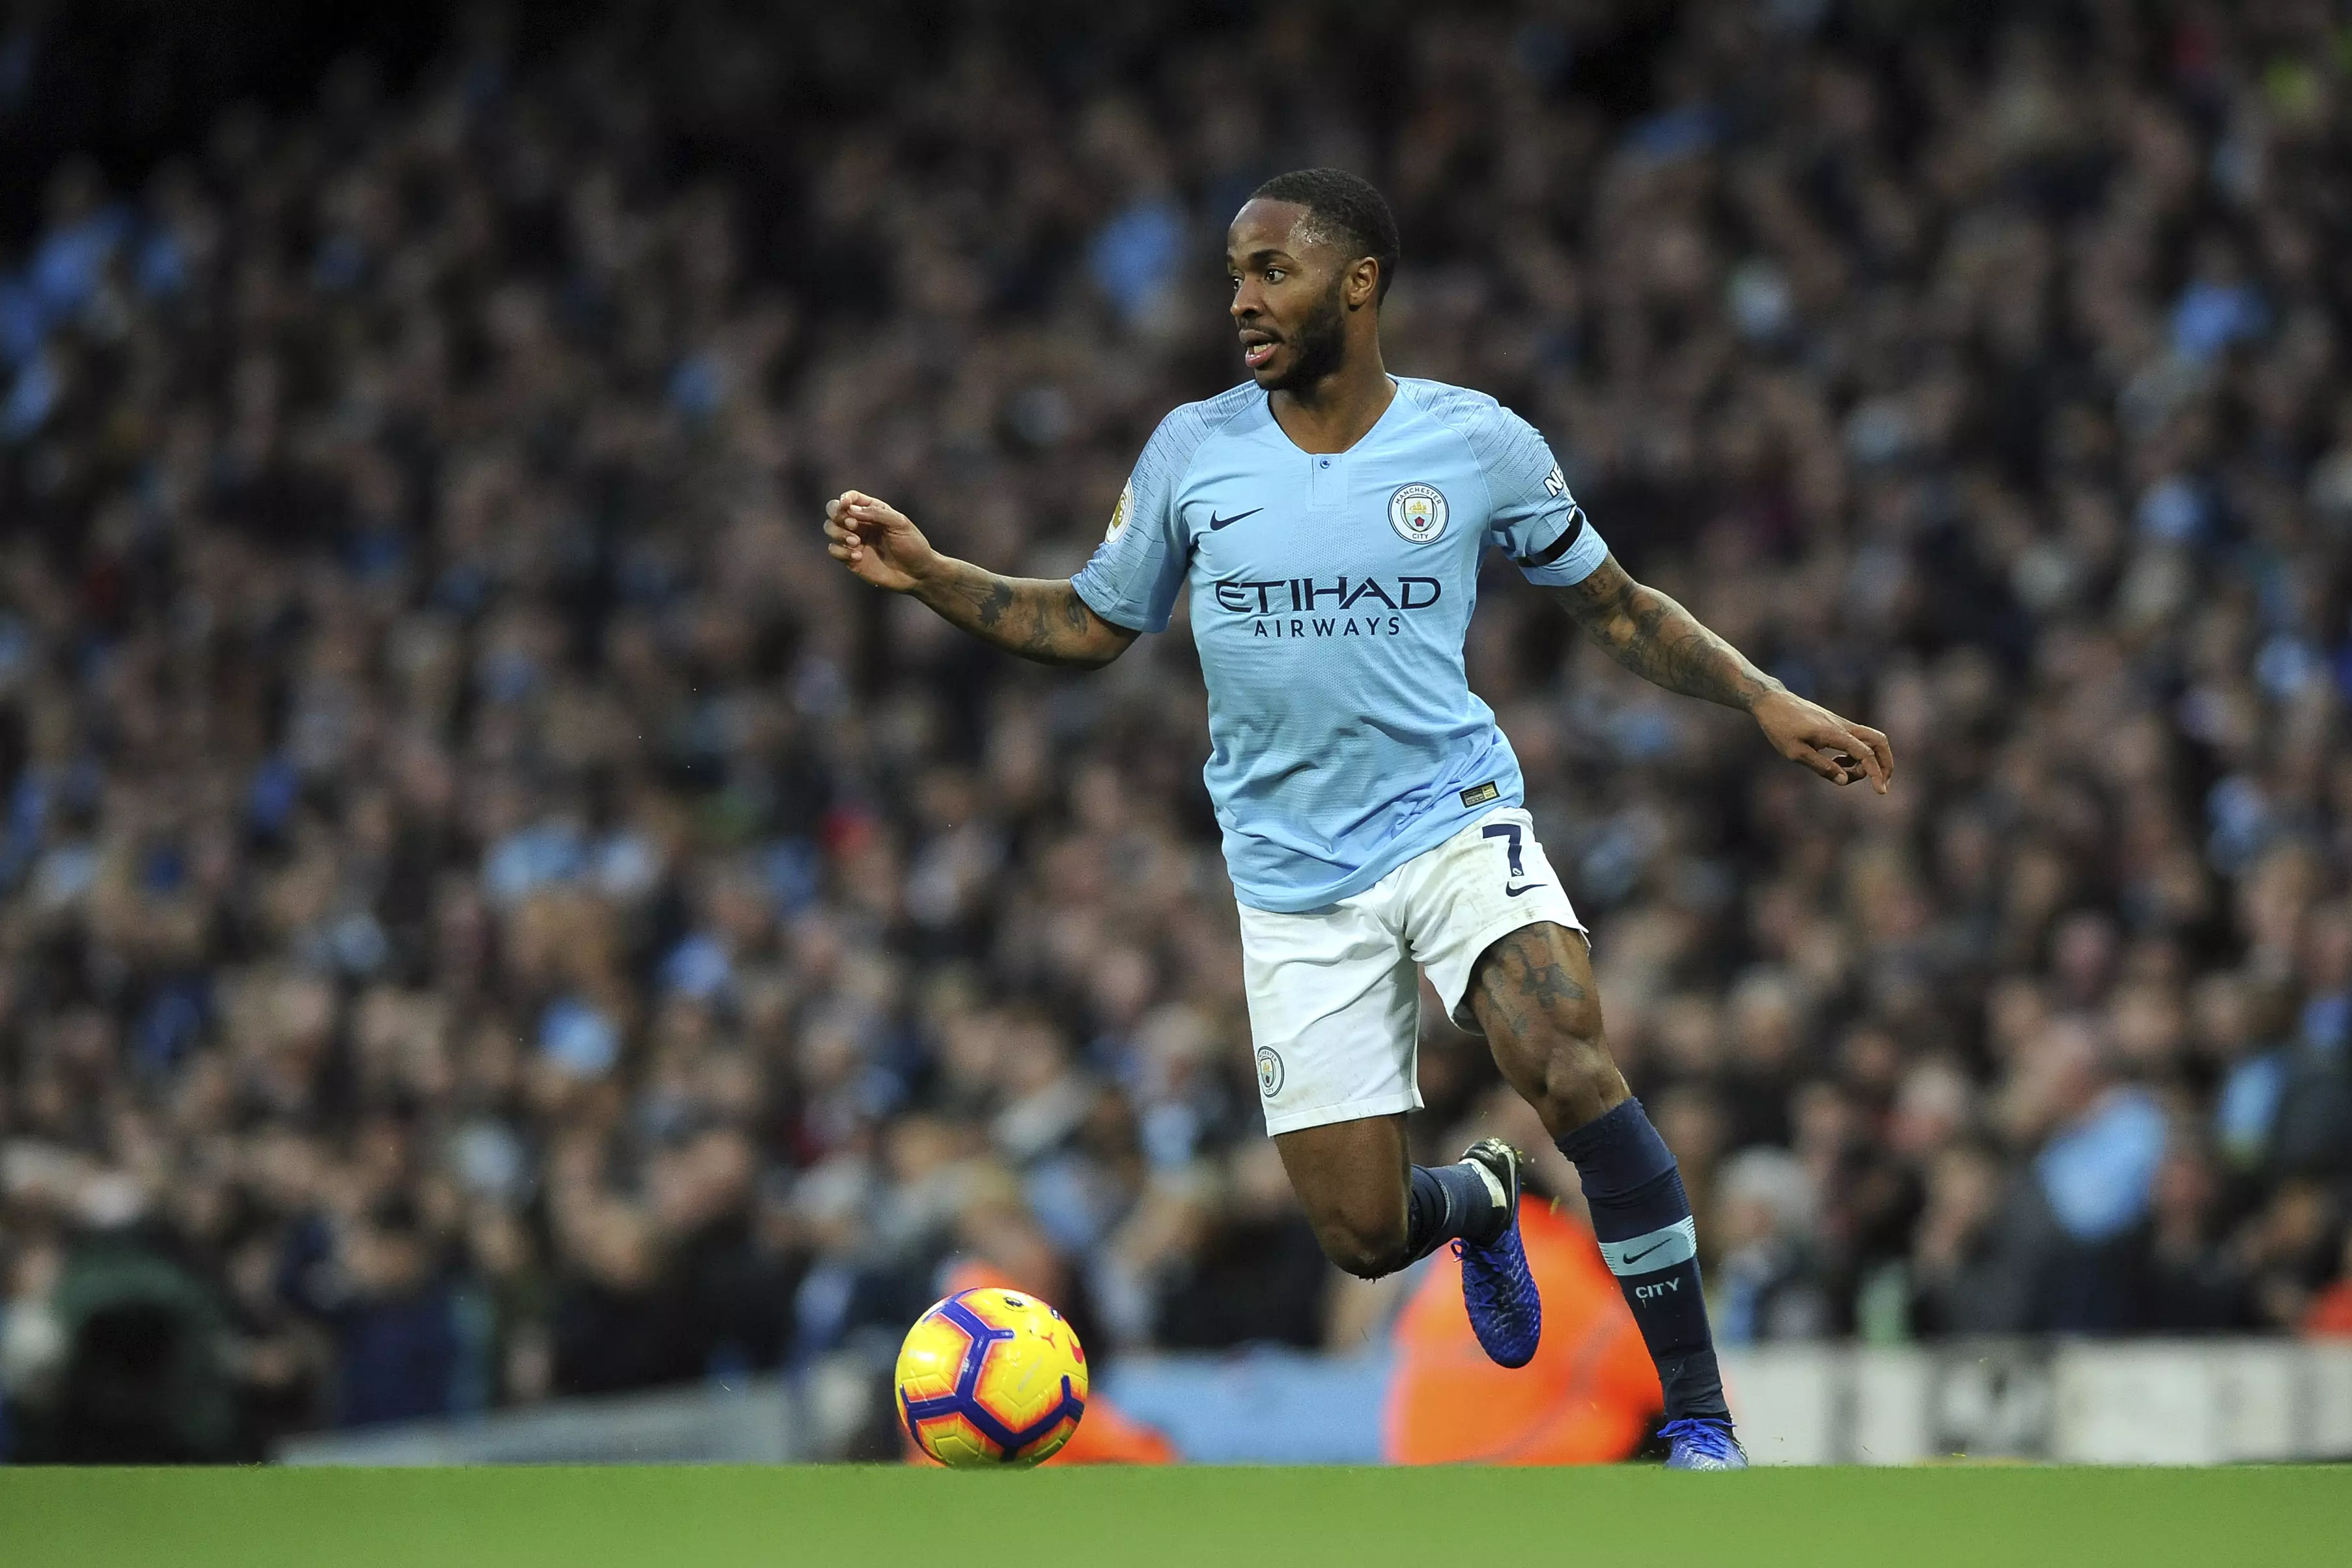 Raheem in action for Manchester City.